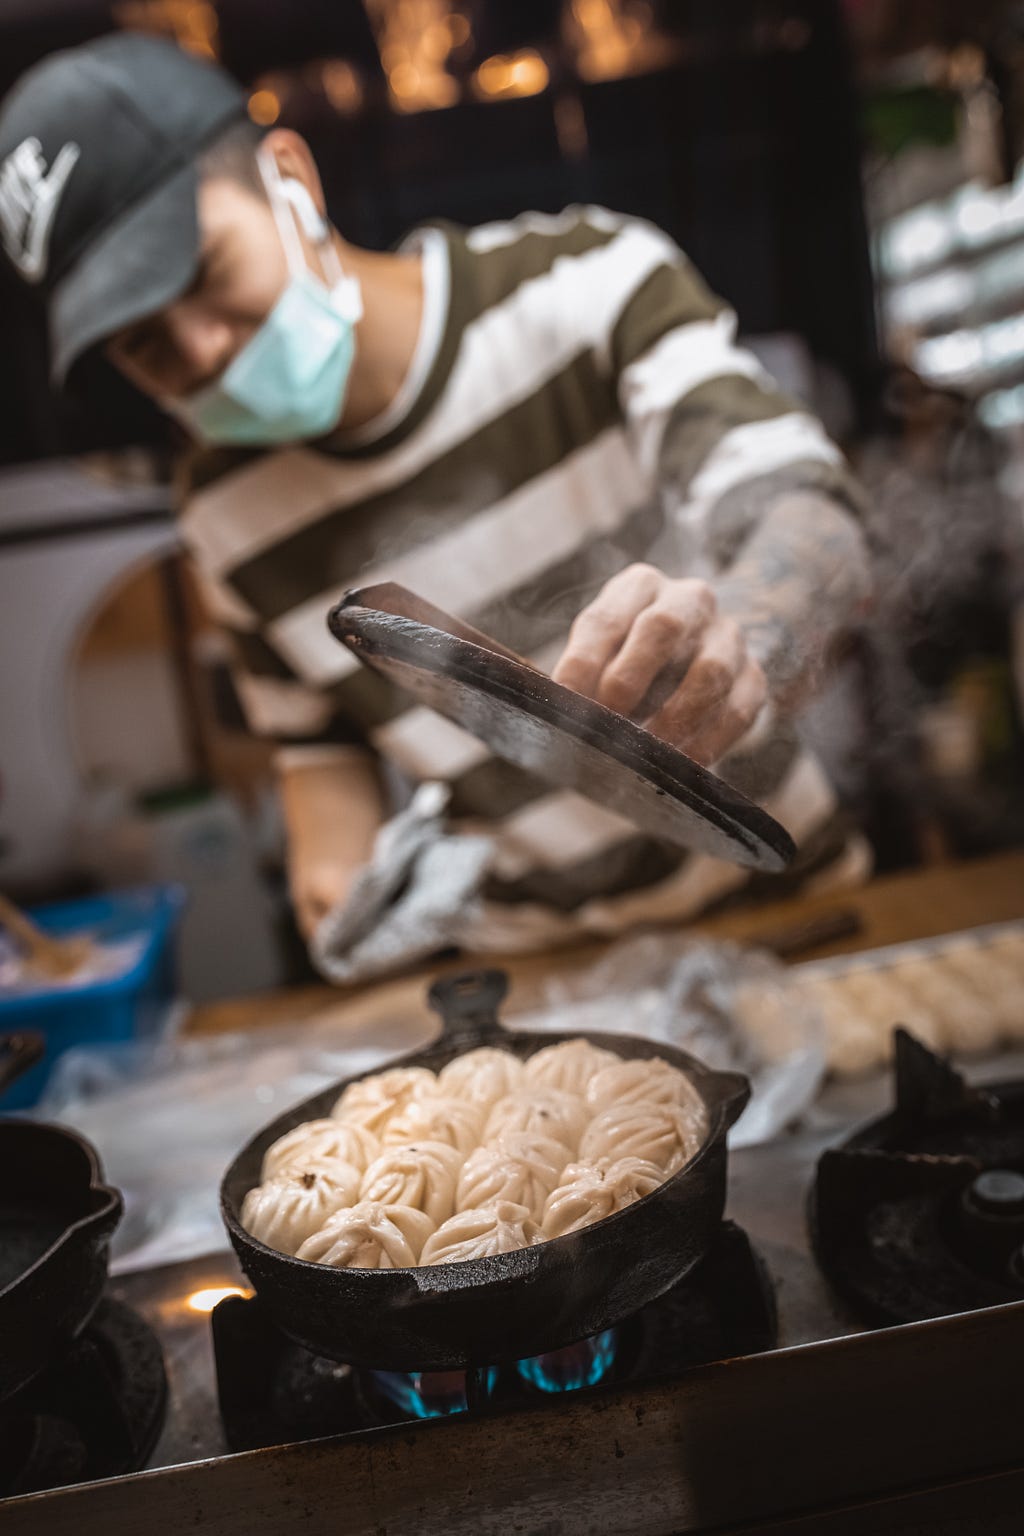 Taiwanese street vendor checking on the dumplings he is cooking